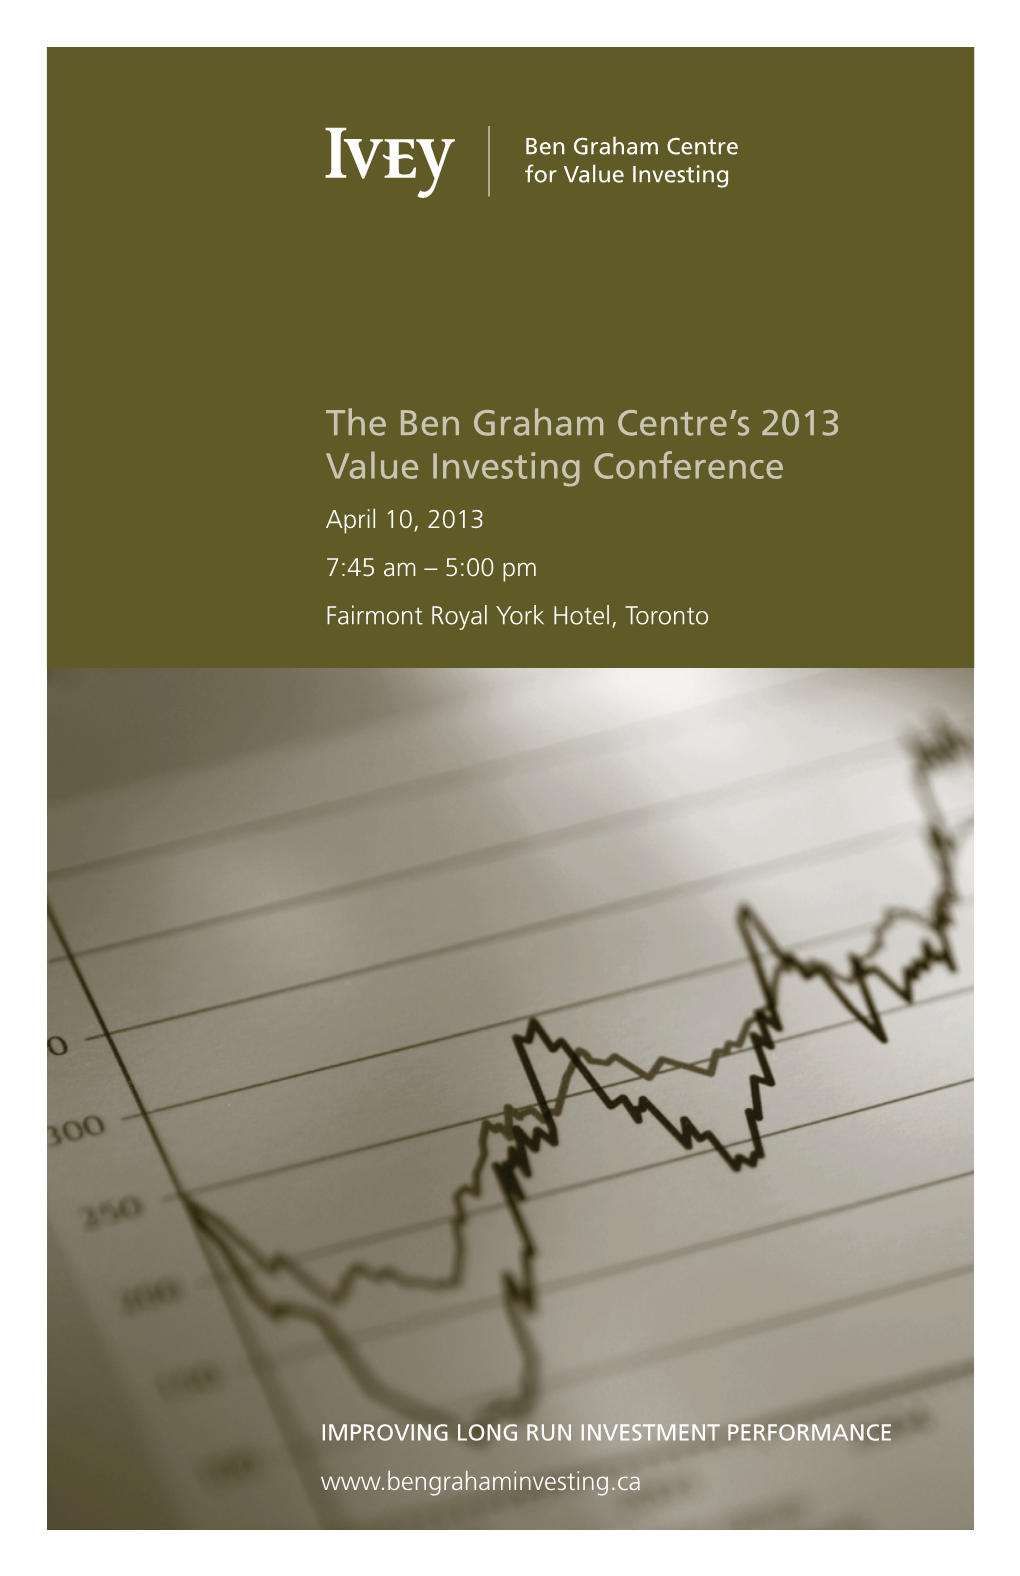 The Ben Graham Centre's 2013 Value Investing Conference